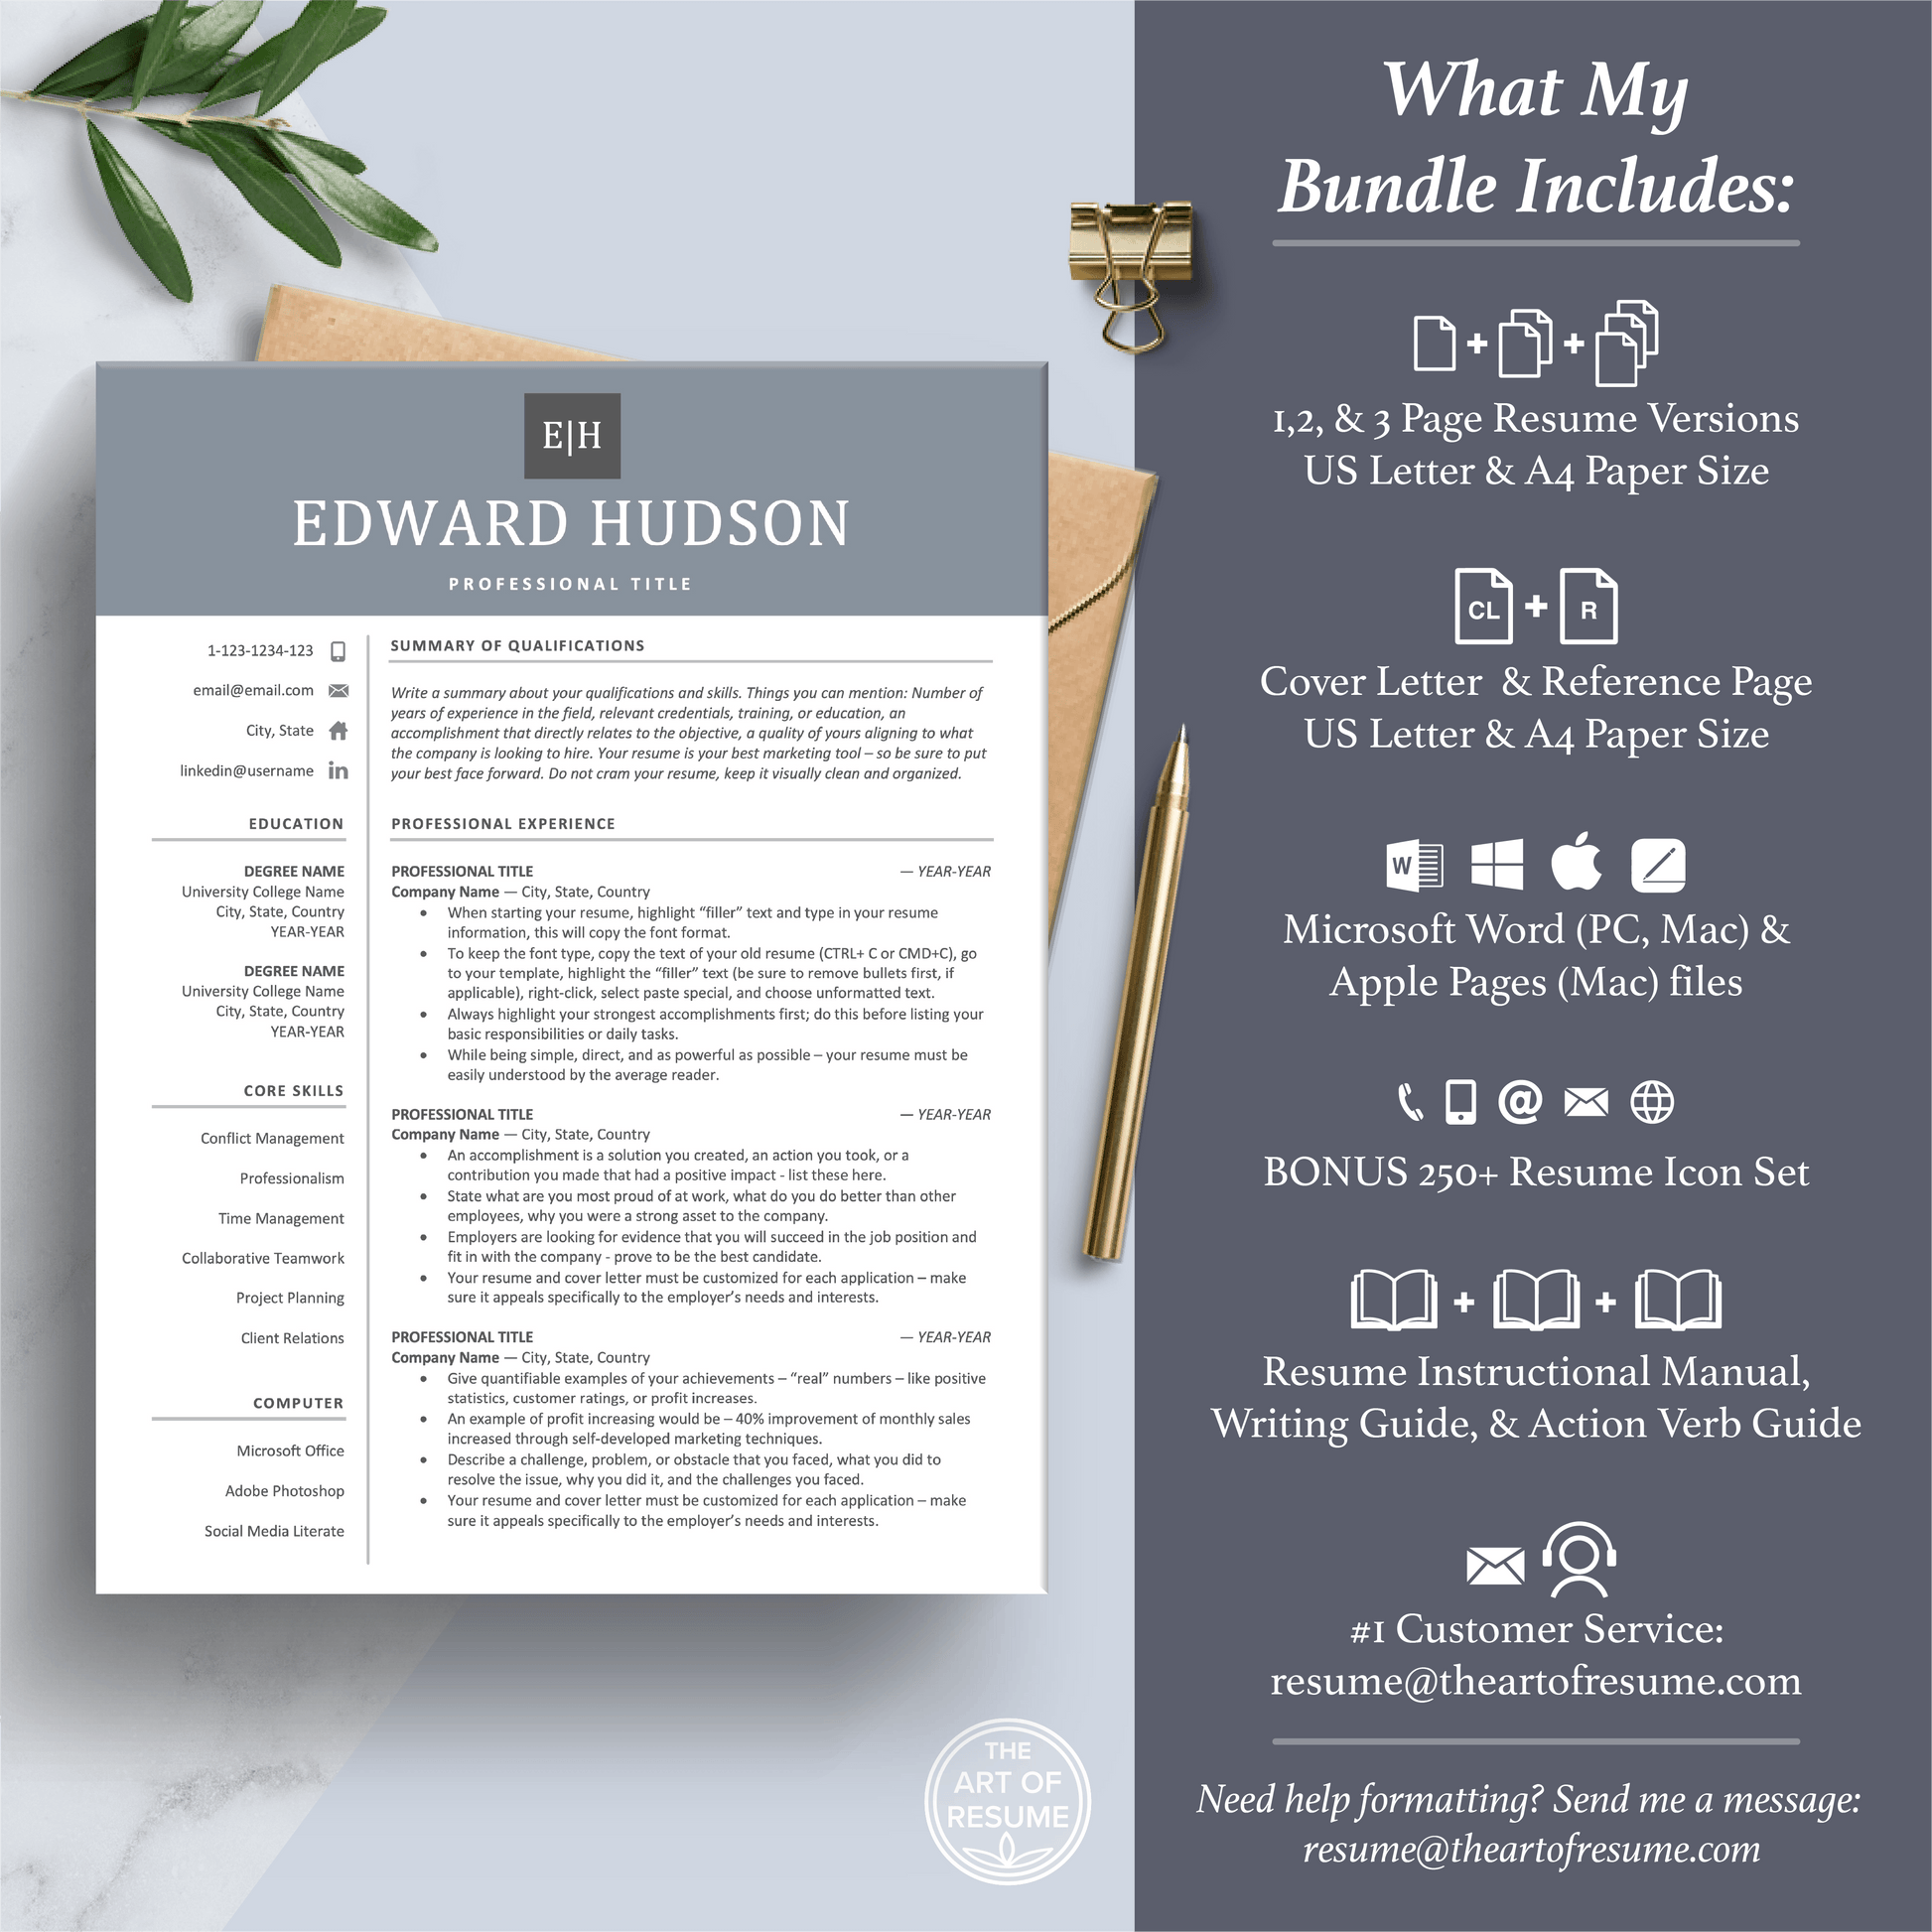 The Art of Resume Templates | Professional Simple Blue Grey Resume CV Template Maker 3, Cover Letter, Reference Page, Mac, PC, A4 Paper, US size, Free Guide, The Art of Resume Writing, 250 Bonus Resume Icons